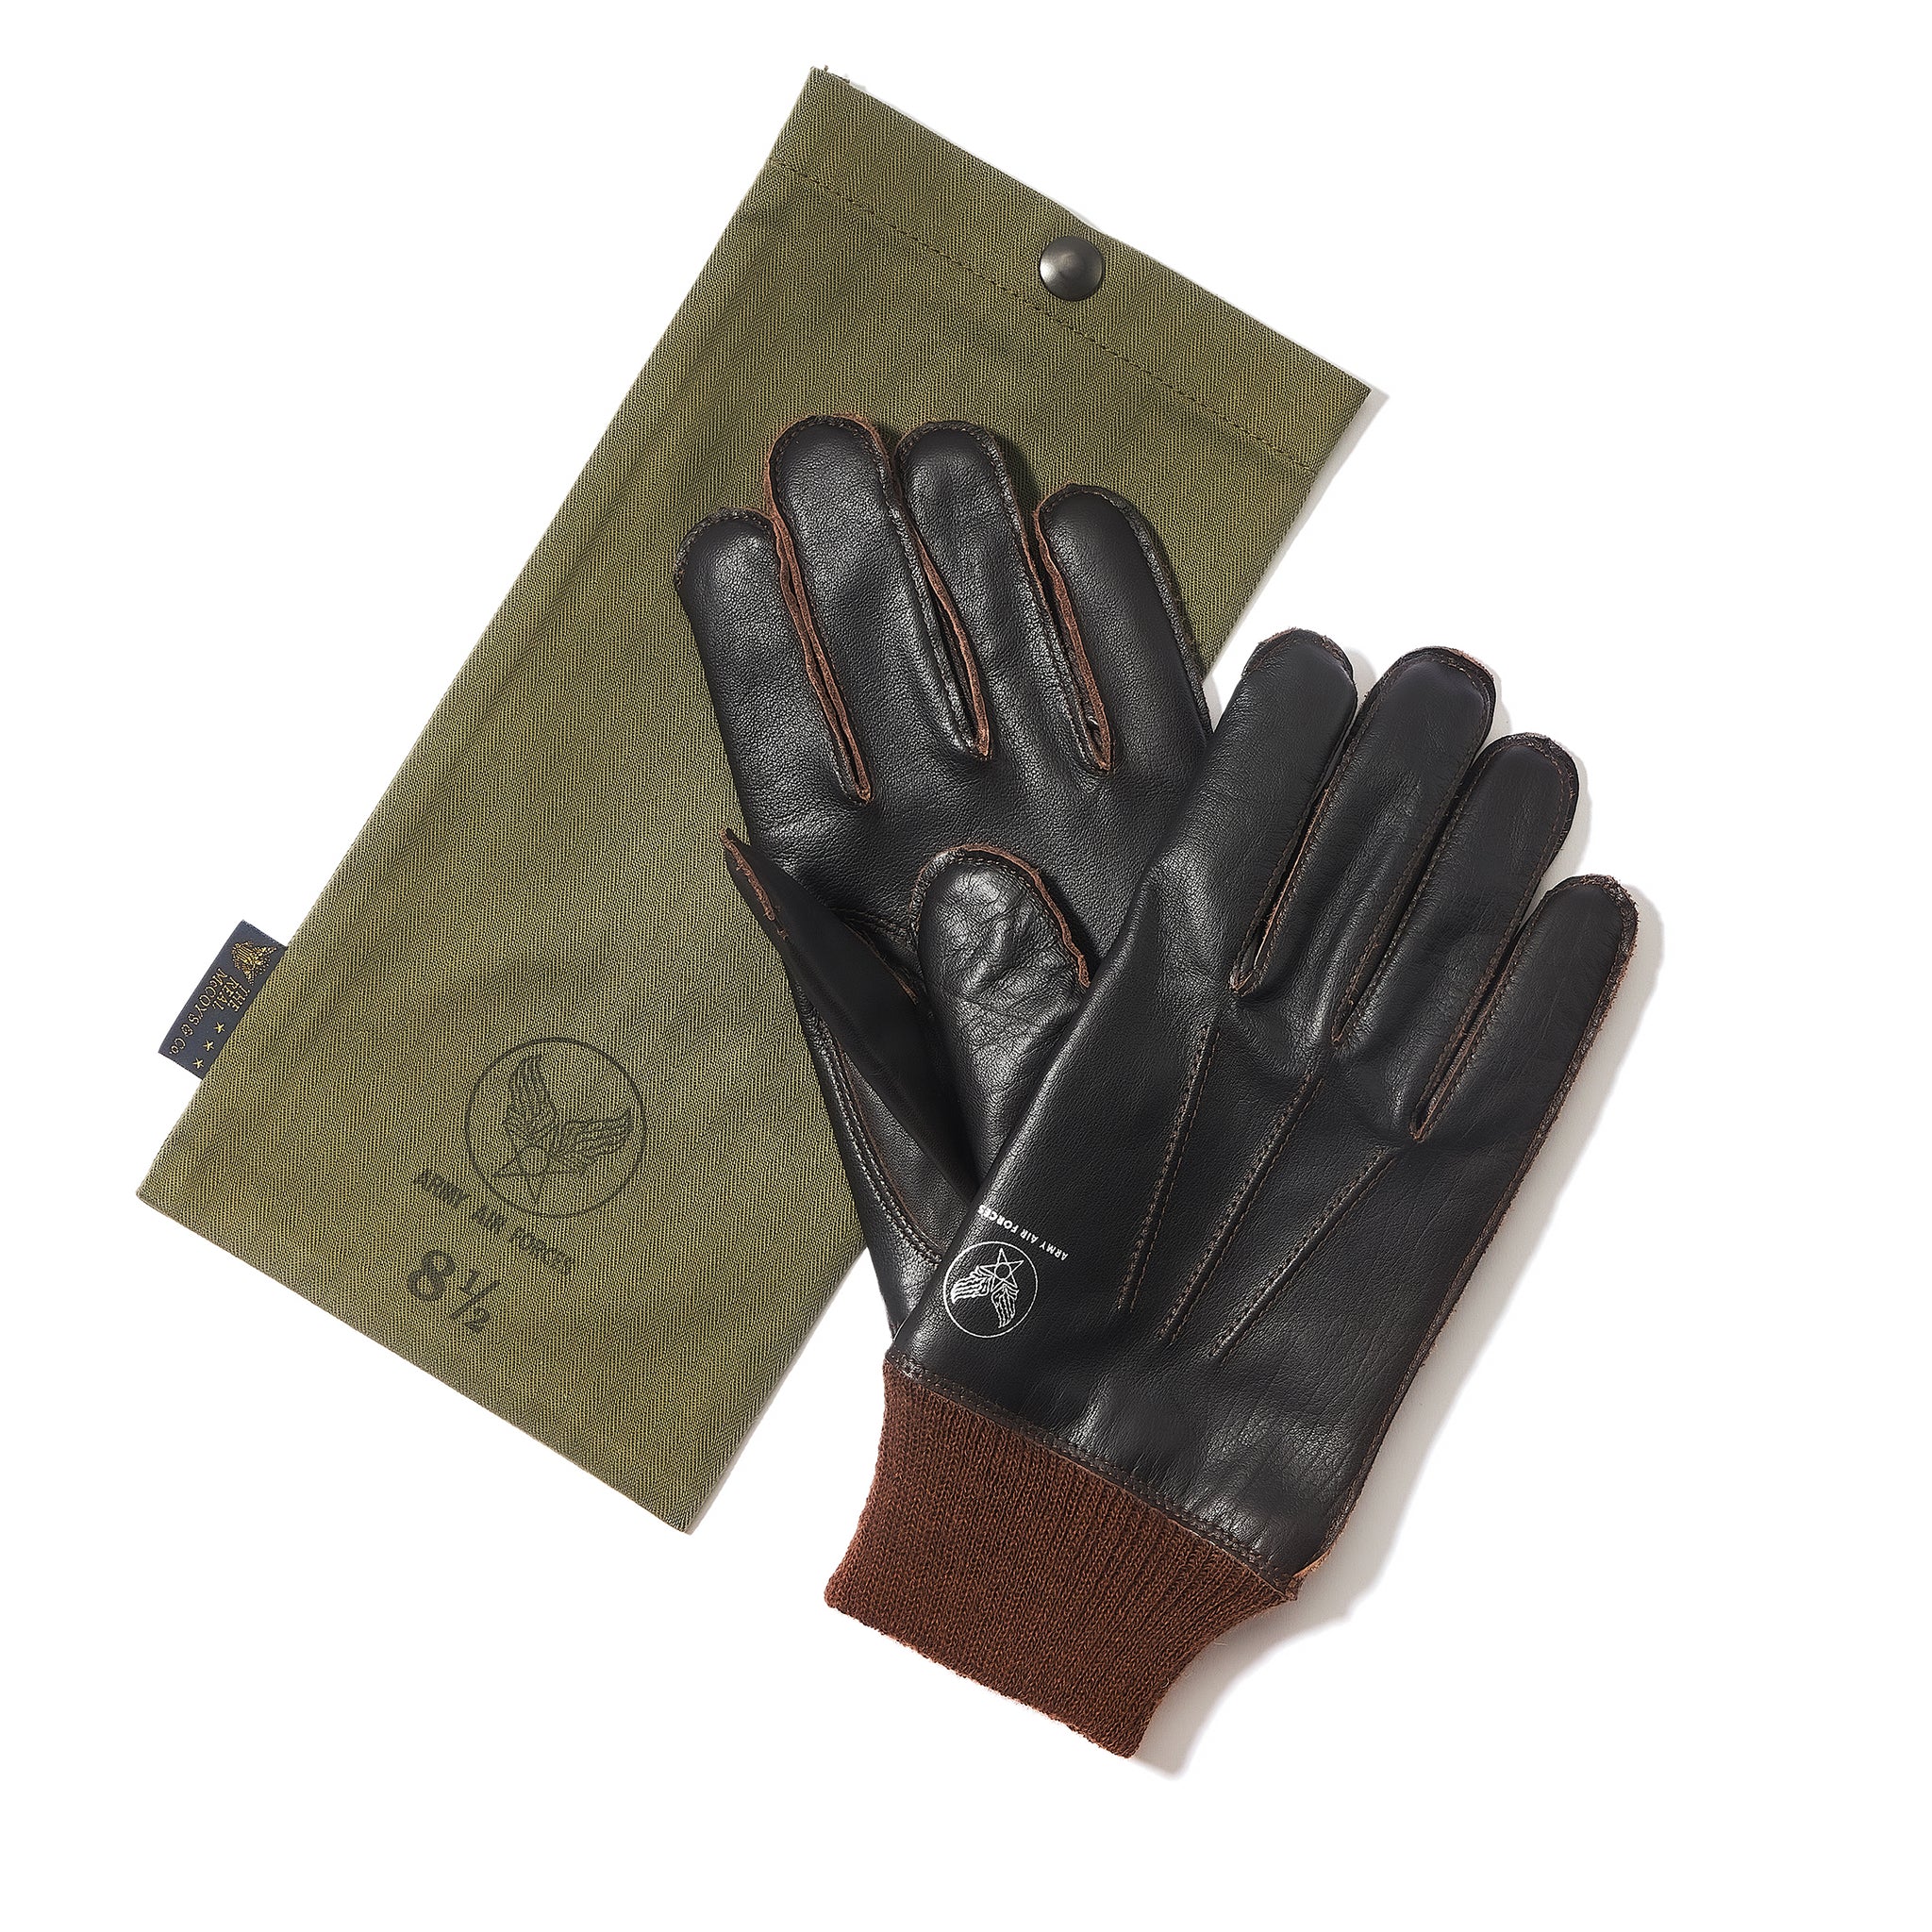 TYPE A-10 GLOVE, FLYING WINTER – The Real McCoy's